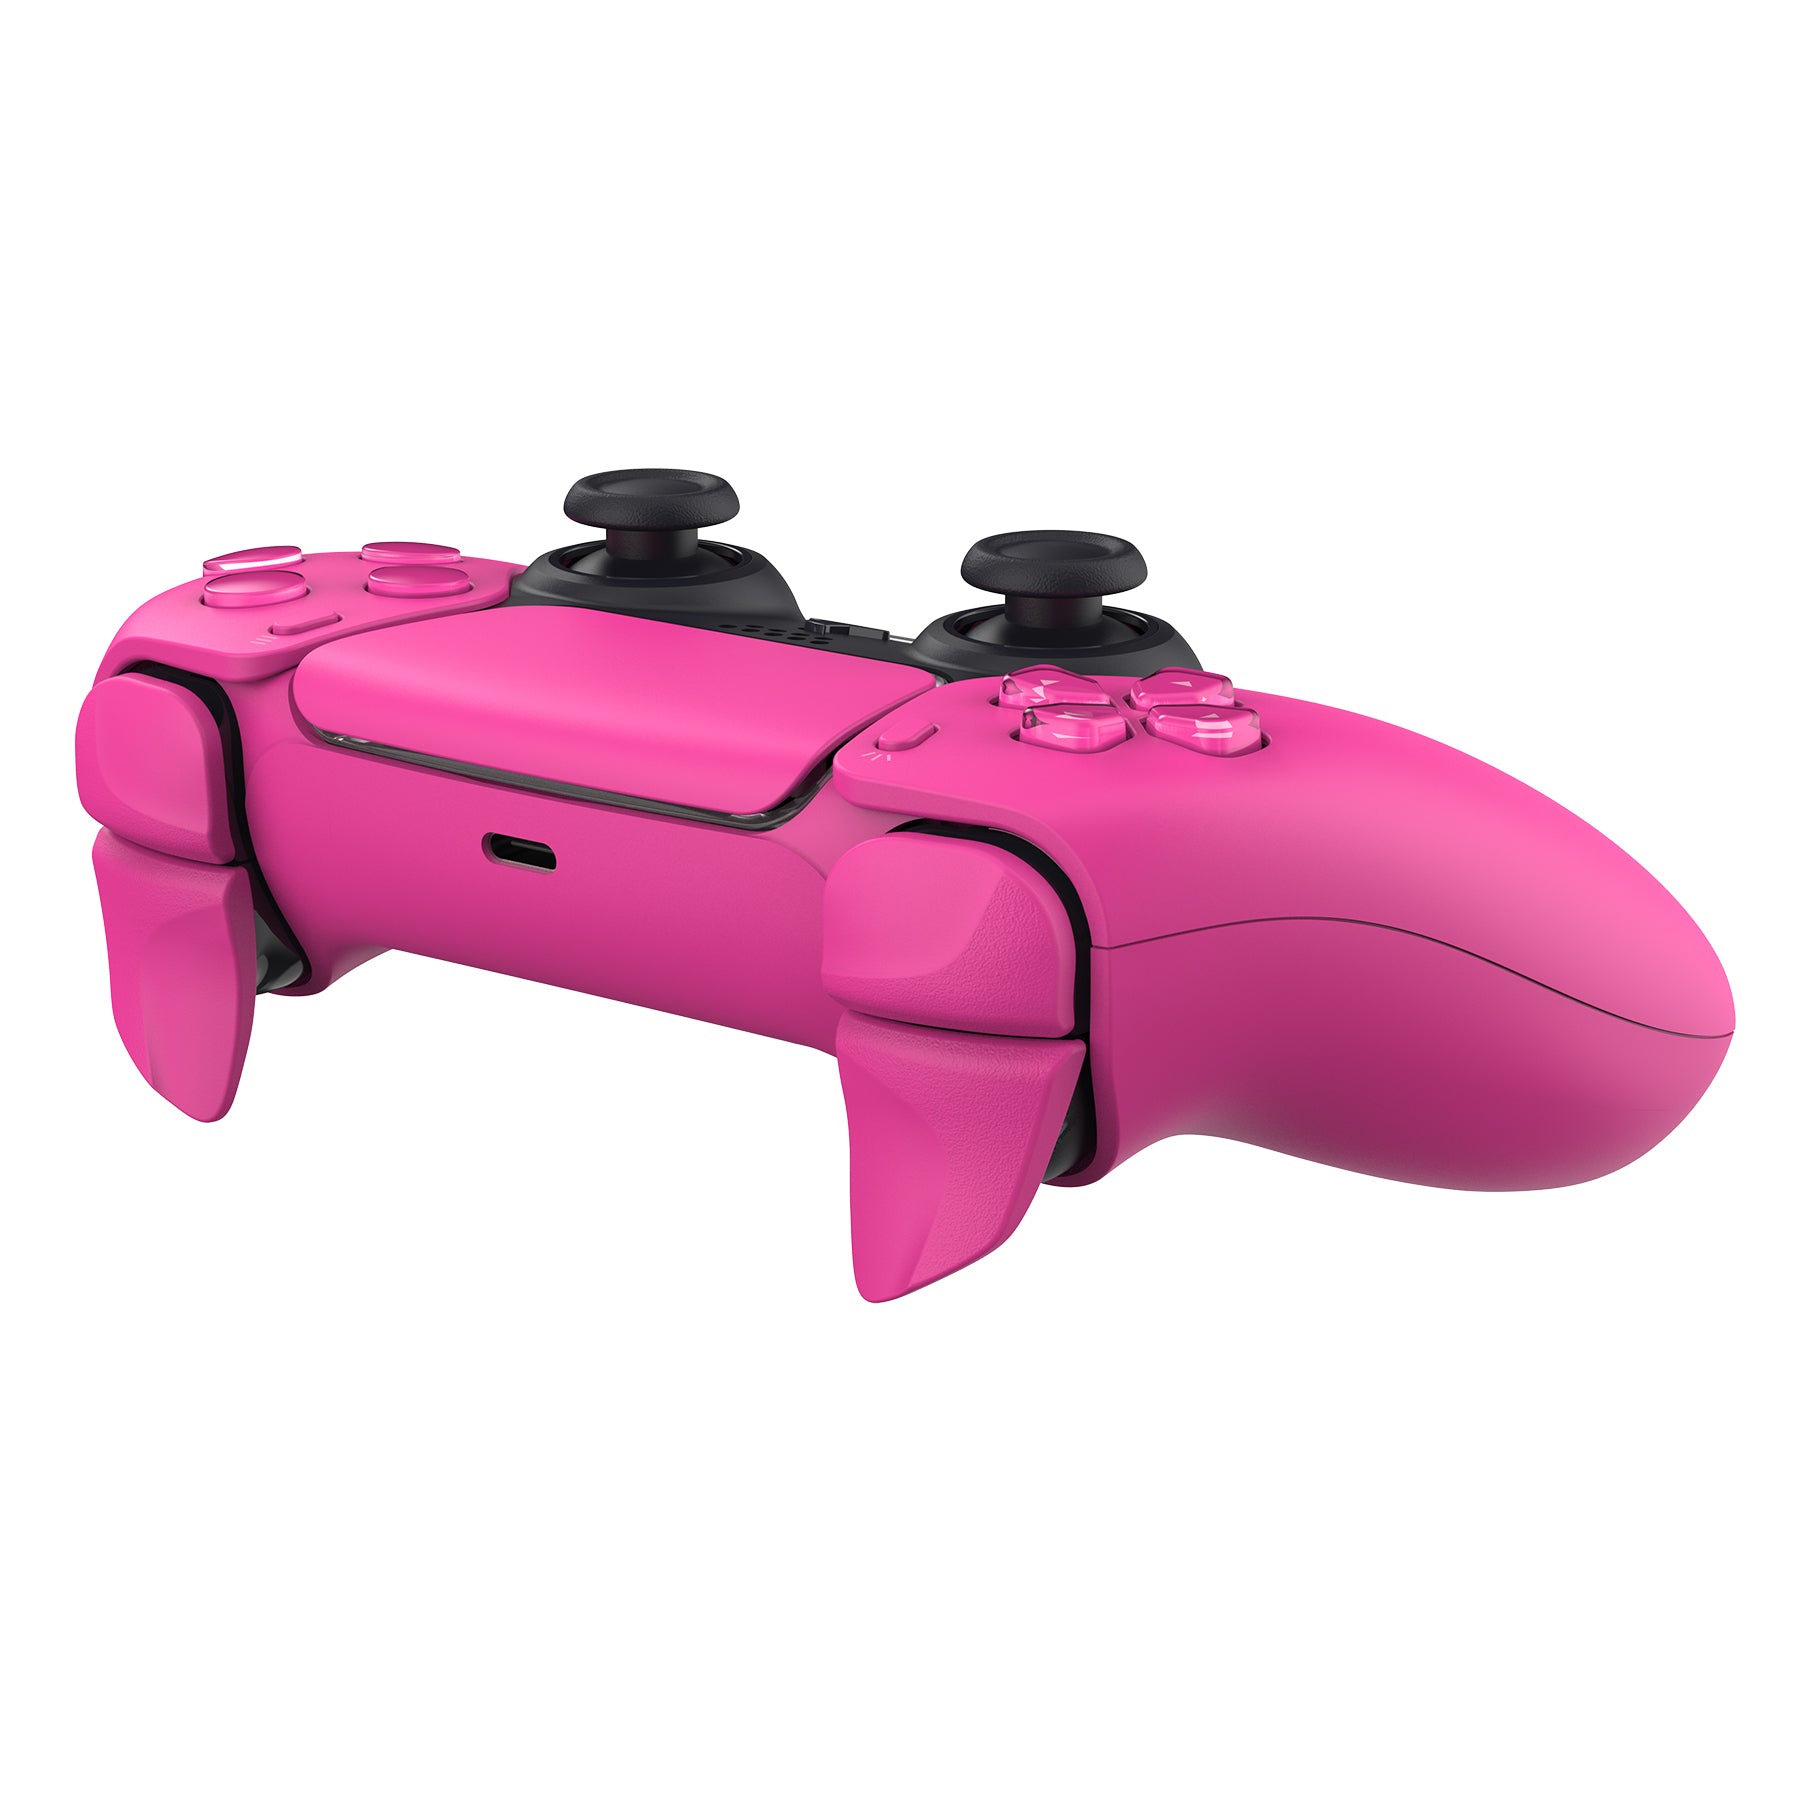 PlayVital Nova Pink 2 Pair Shoulder Buttons Extension Triggers for PS5 Controller, Game Improvement Adjusters for PS5 Controller, Bumper Trigger Extenders for PS5 Controller - PFPJ088 PlayVital